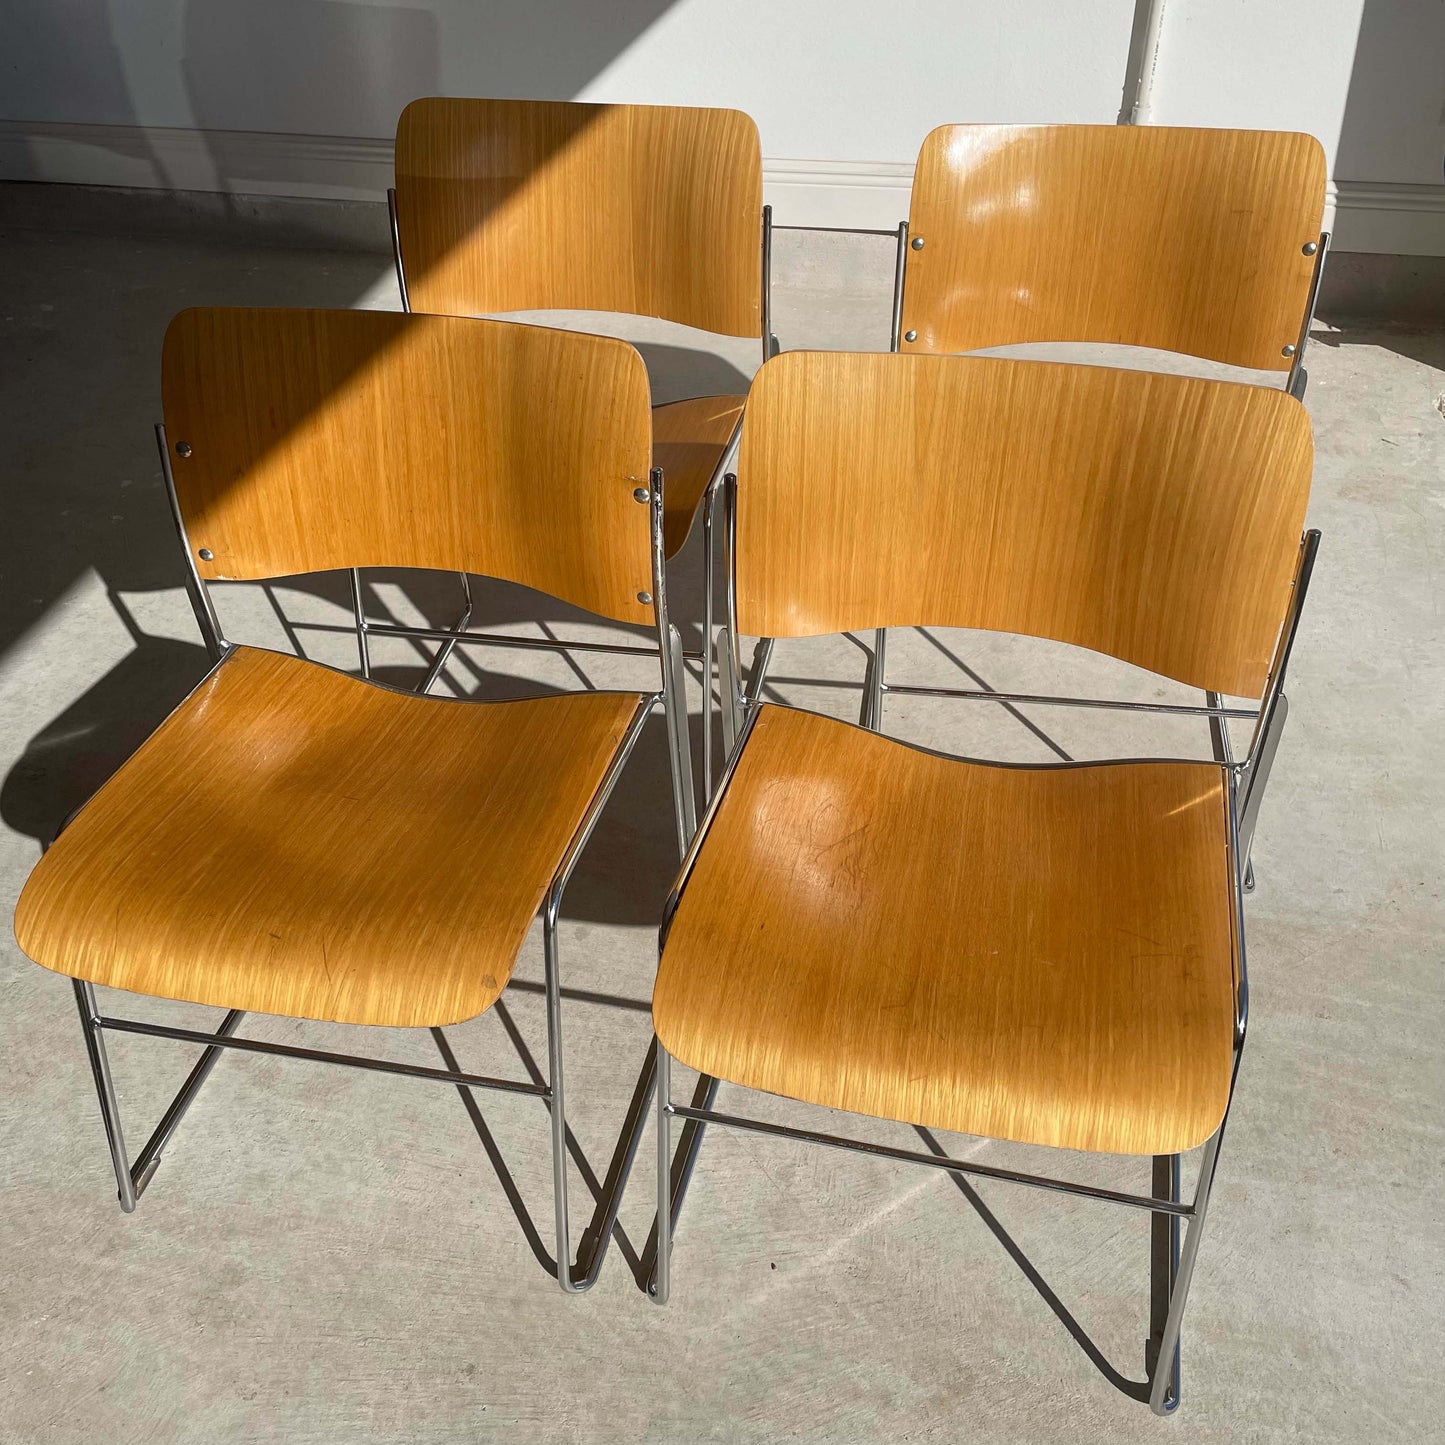 Set of 4: David Rowland 40/4 Bentwood Stackable Chair